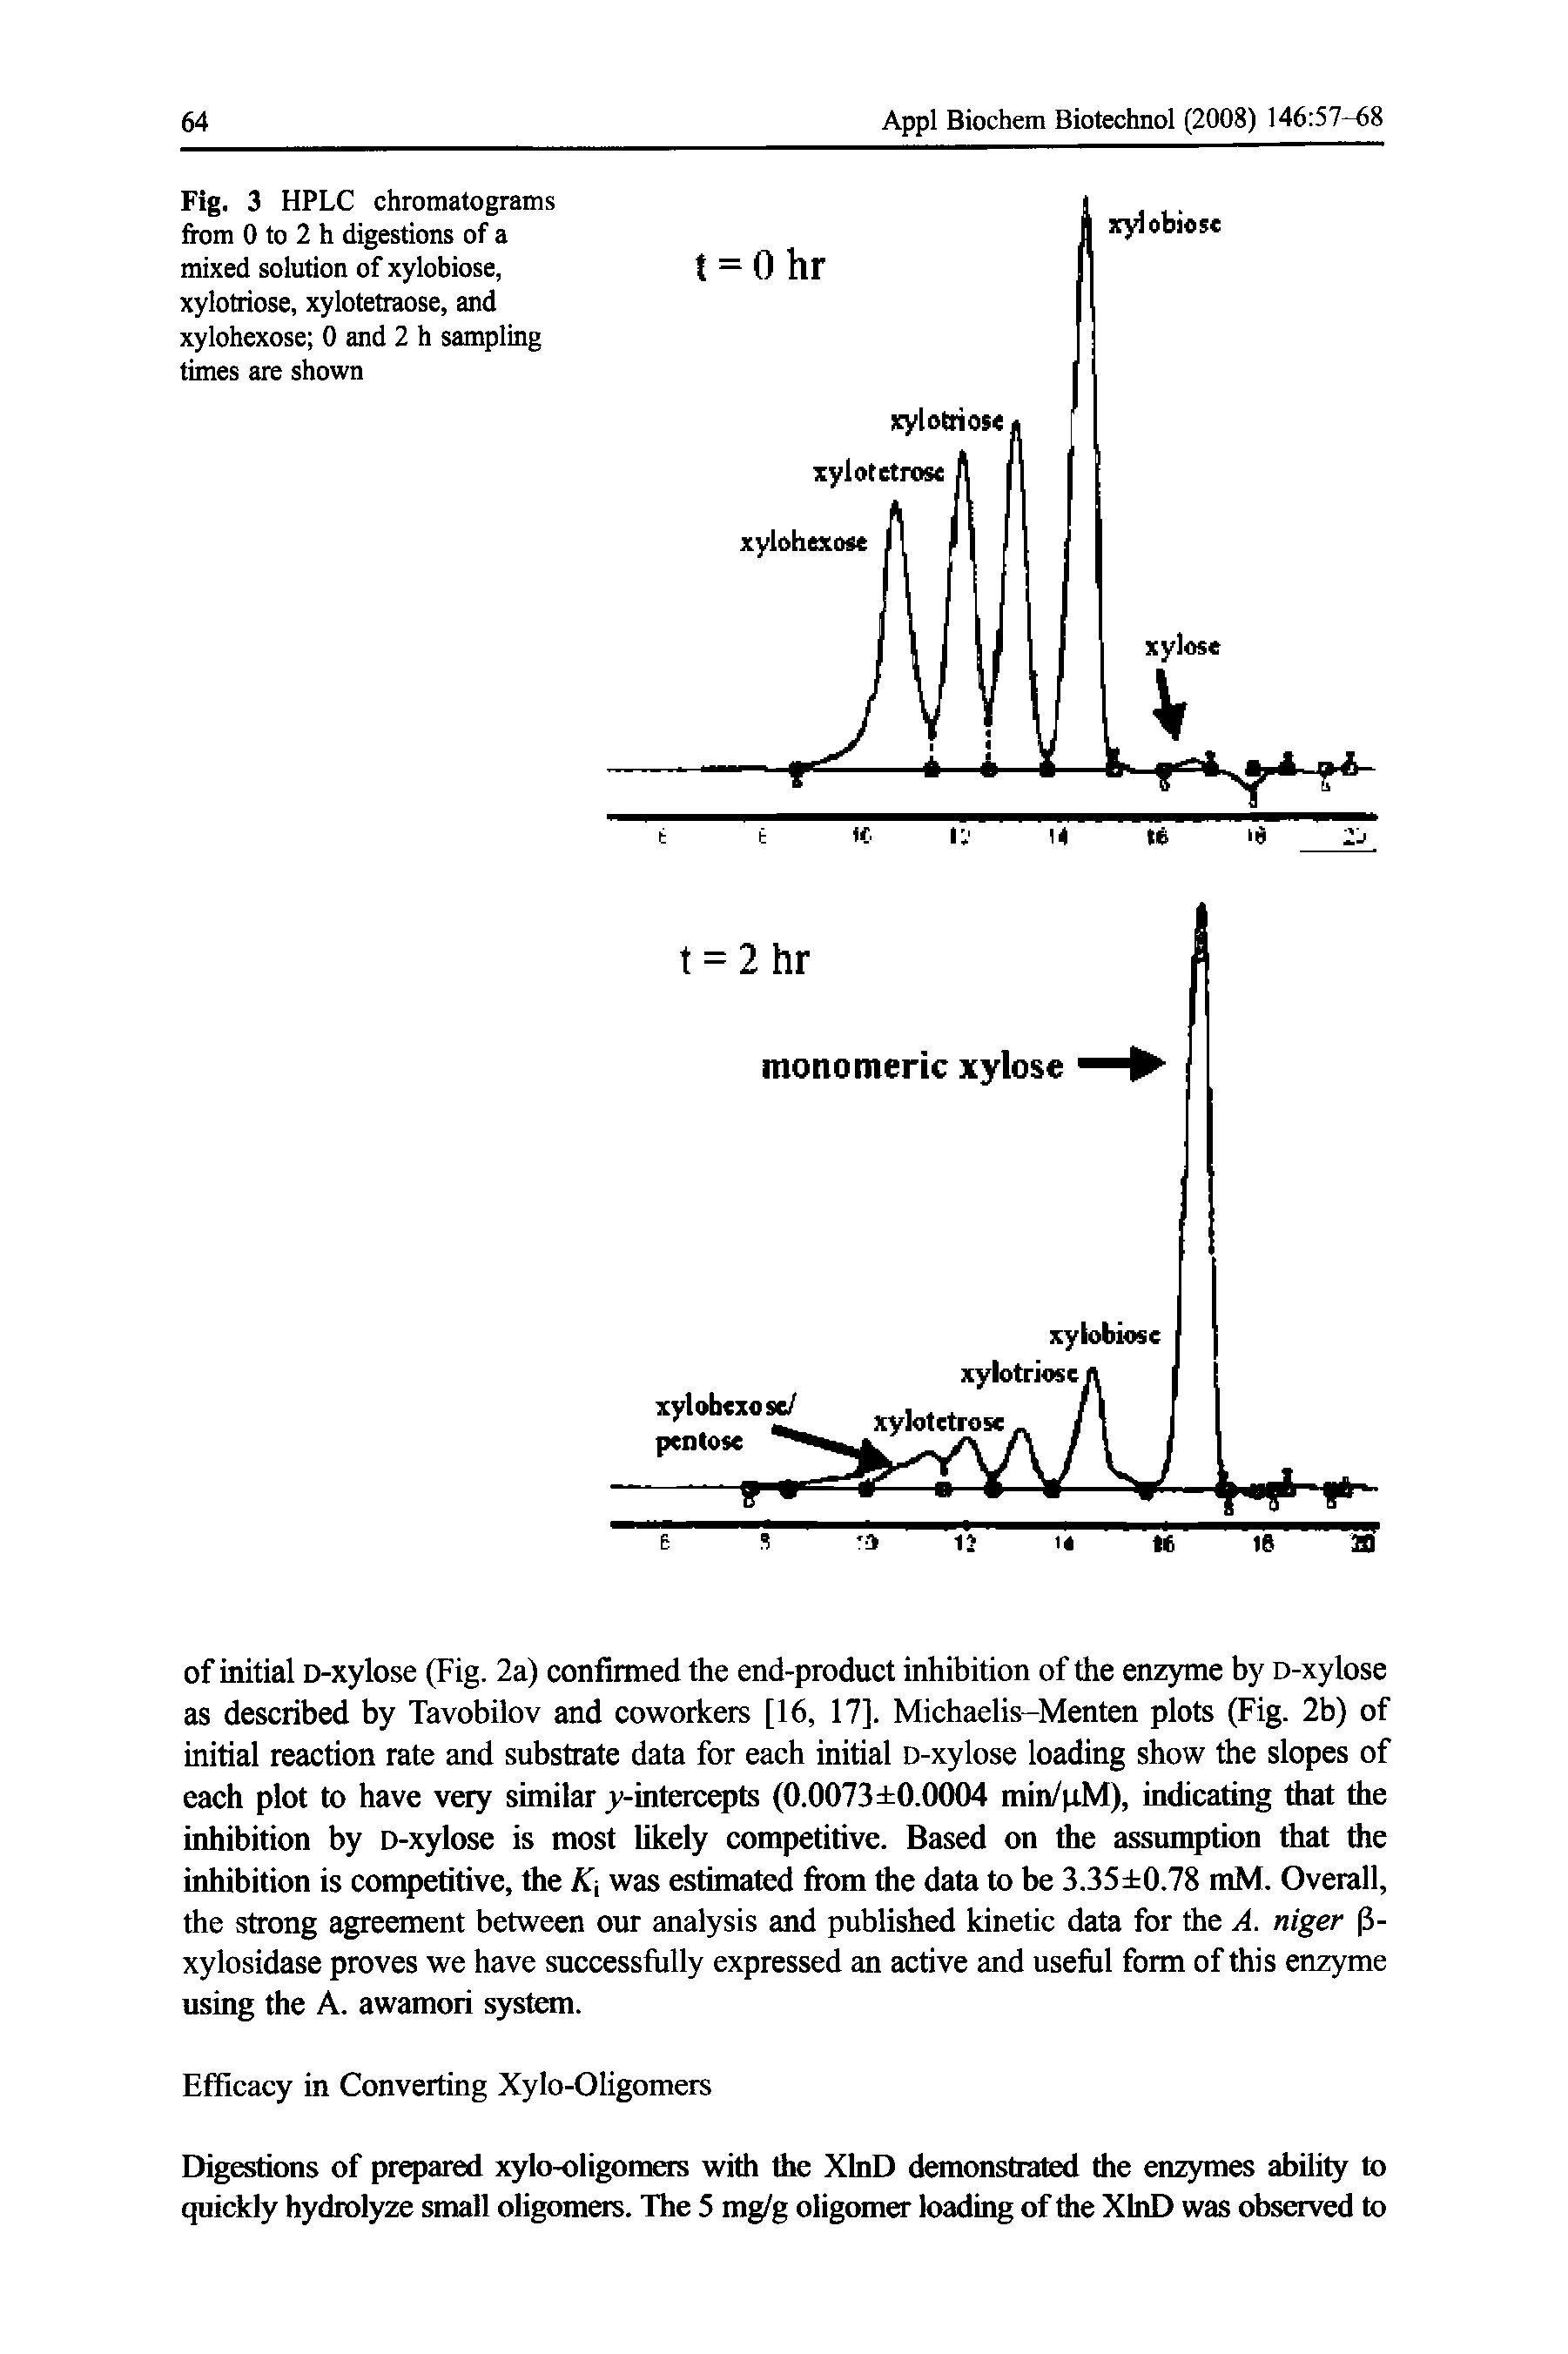 Fig. 3 HPLC chromatograms from 0 to 2 h digestions of a mixed solution of xylobiose, xylotriose, xylotetraose, and xylohexose 0 and 2 h sampling times are shown...